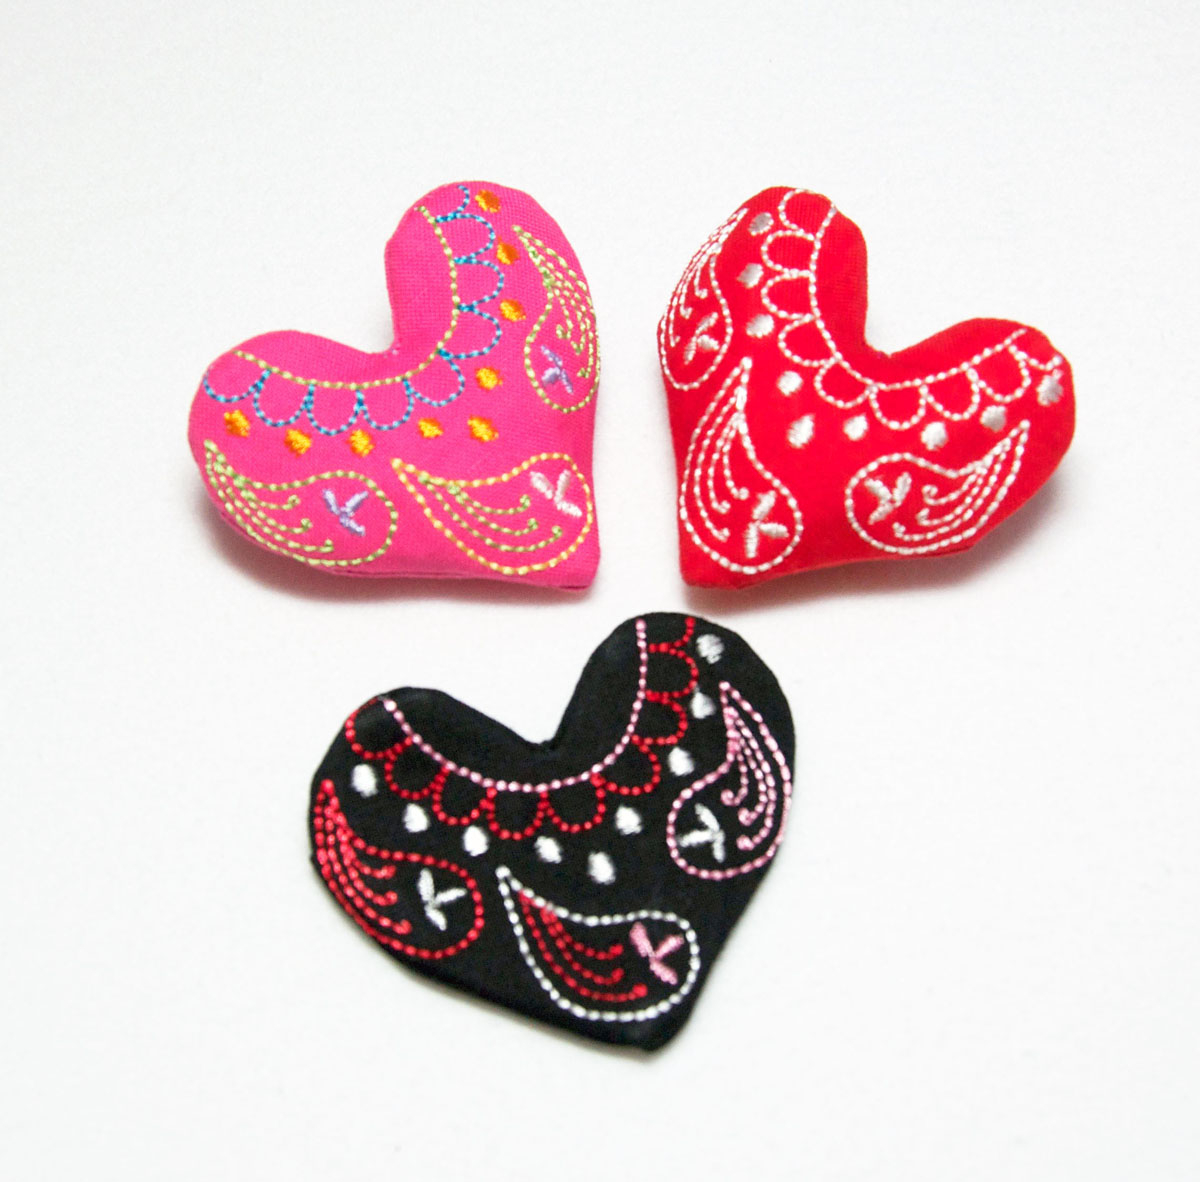 Embroidery Patterns For Sewing Machines Embroidered Heart Pin And Free Embroidery Design Weallsew